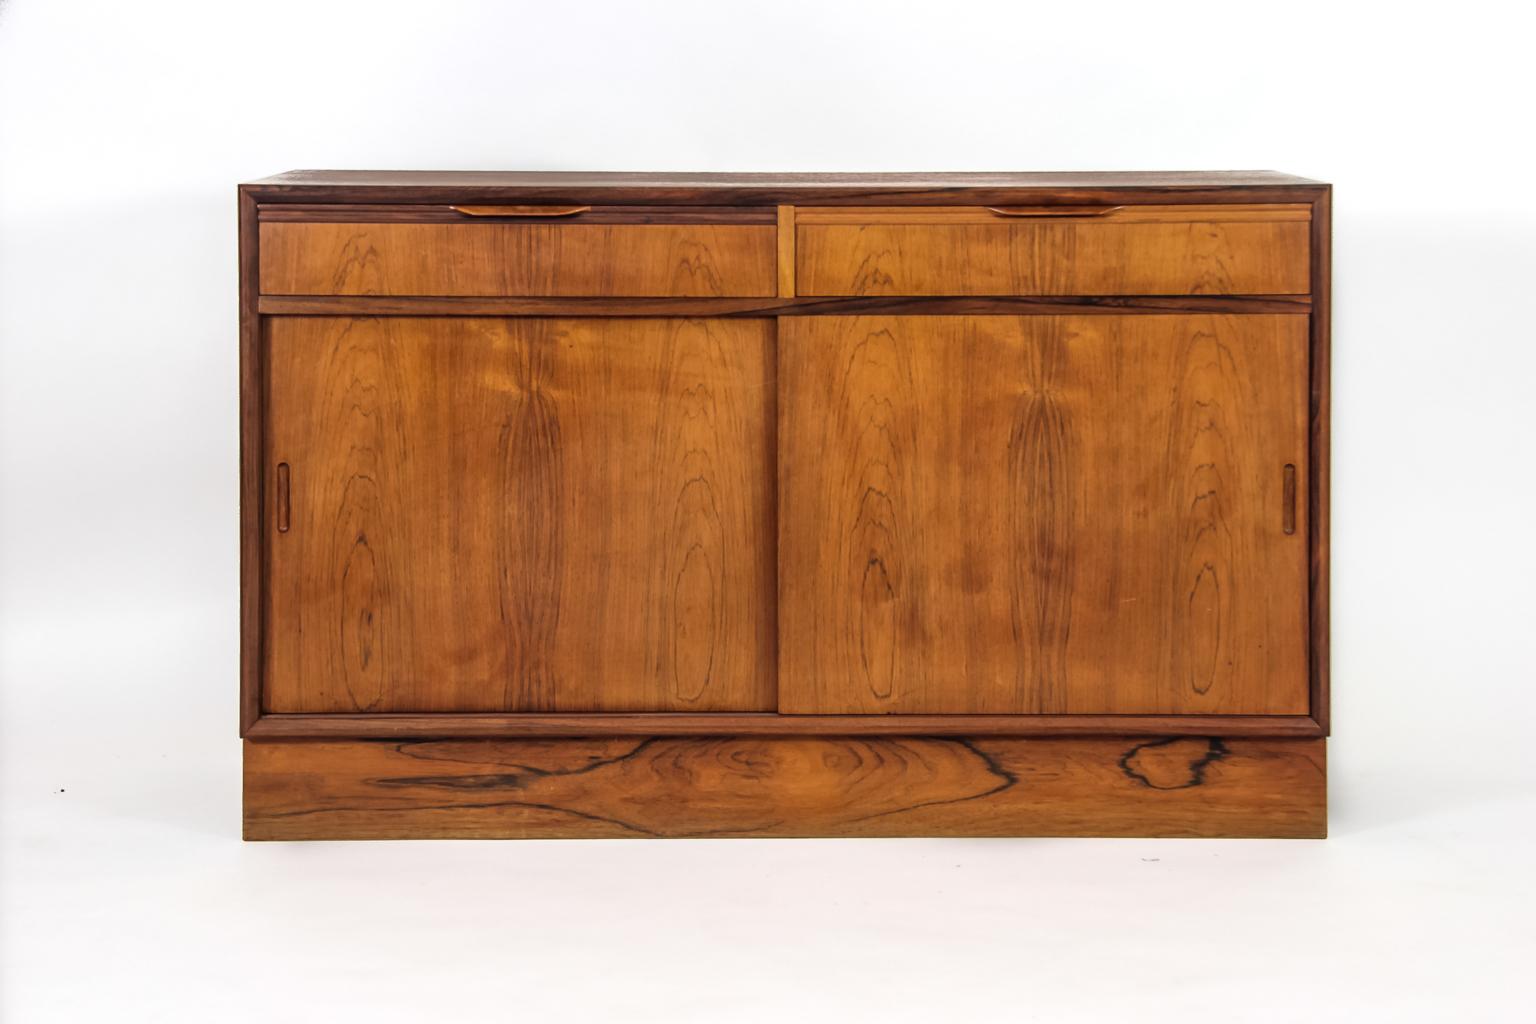 A sophisticated Danish 1960s rosewood cabinet with two drawer under top, long well-figured top above two drawers and two slide doors all in a rich match-booked Brazilian rosewood veneer with solid rosewood moulded handles and front frame, a good